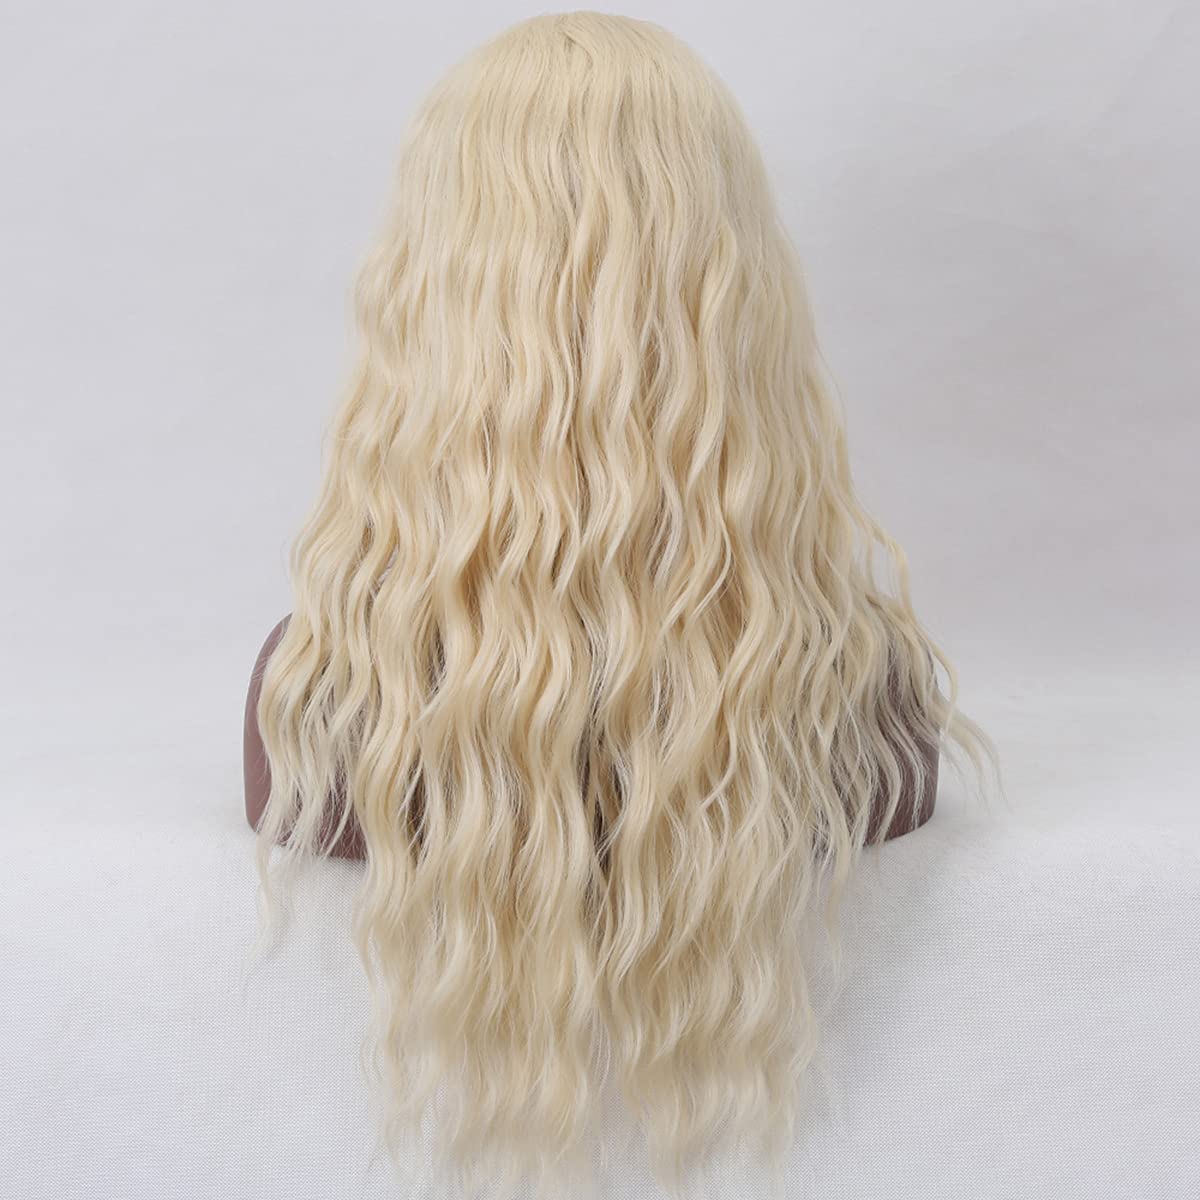 wigs costumes wig blonde wig short wig with bangs wig shop wigs human hair blonde hair color blonde hair styles blonde hair with lowlights blonde hair with brown highlights blonde hair ideas blonde hair with bangs,blonde curly hair black women,long curly hair,blonde curly hair black women,blonde curly hair,curly blonde hair,blonde hair middle part,Straight middle part lace wig,curly kinky middle part blonde hair,Lace front wig,613 Blonde color,blonde wig.613 wig black girl.613 hair on black women